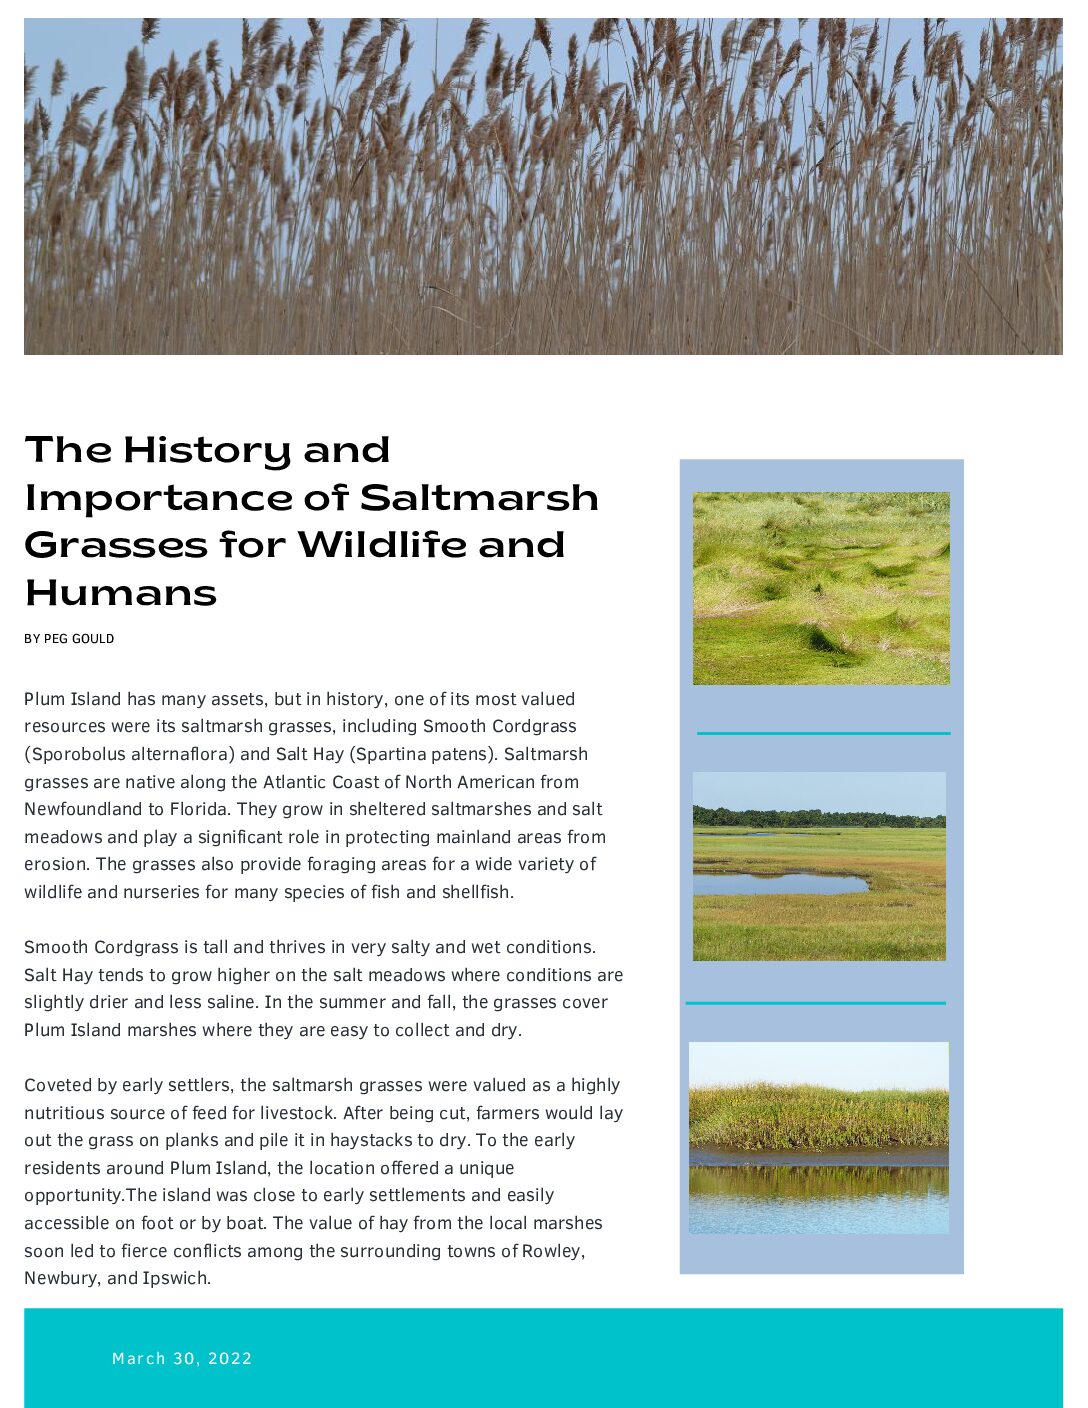 The History and Importance of Saltmarsh Grasses for Wildlife and Humans